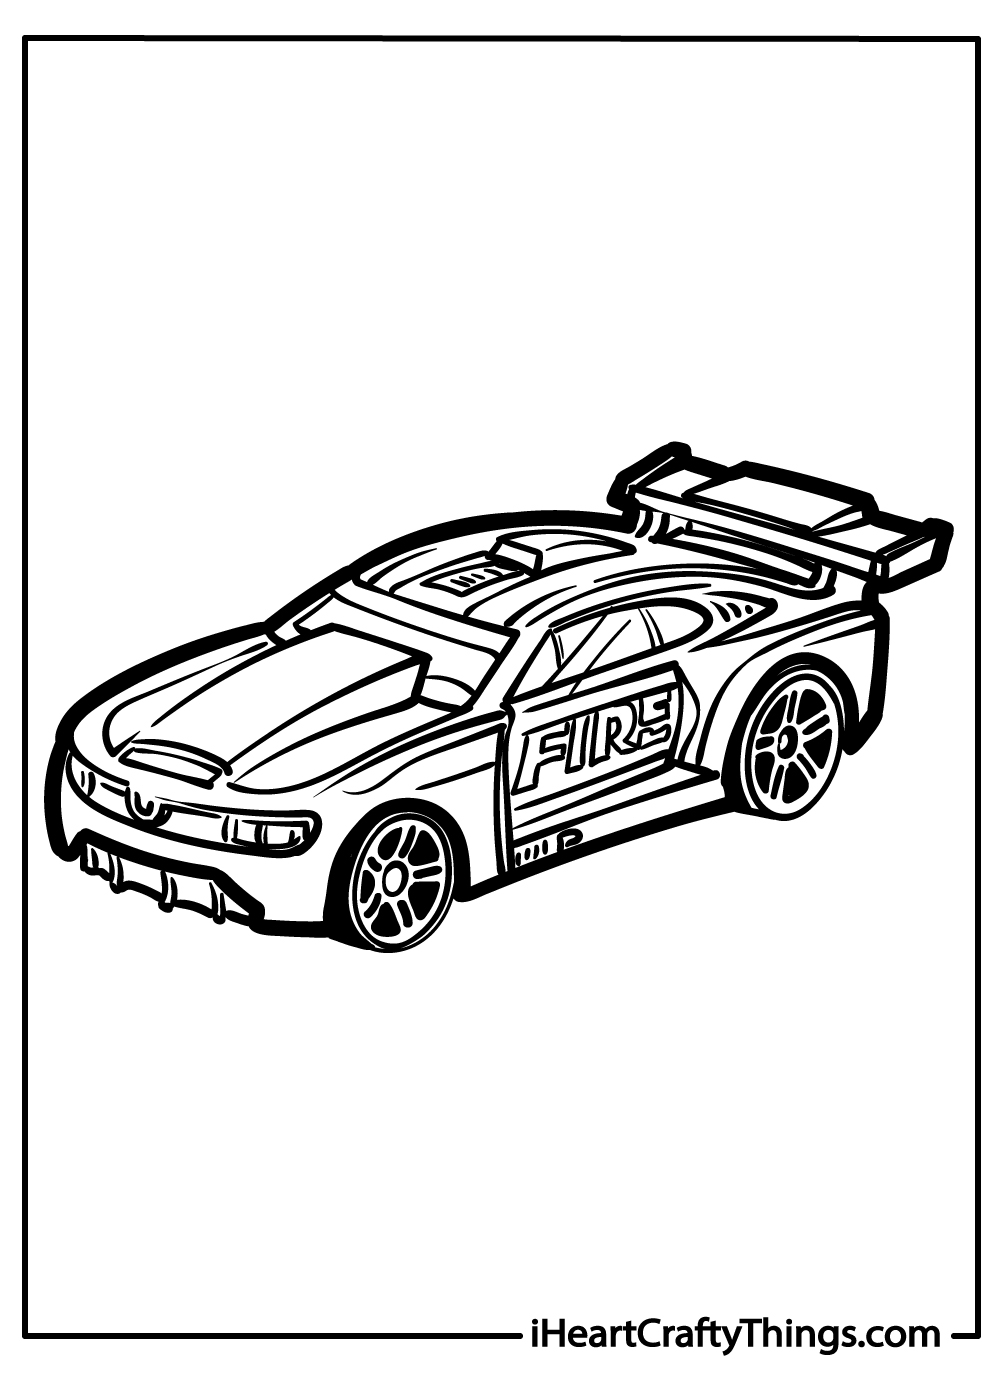 hotwheels free coloring pages